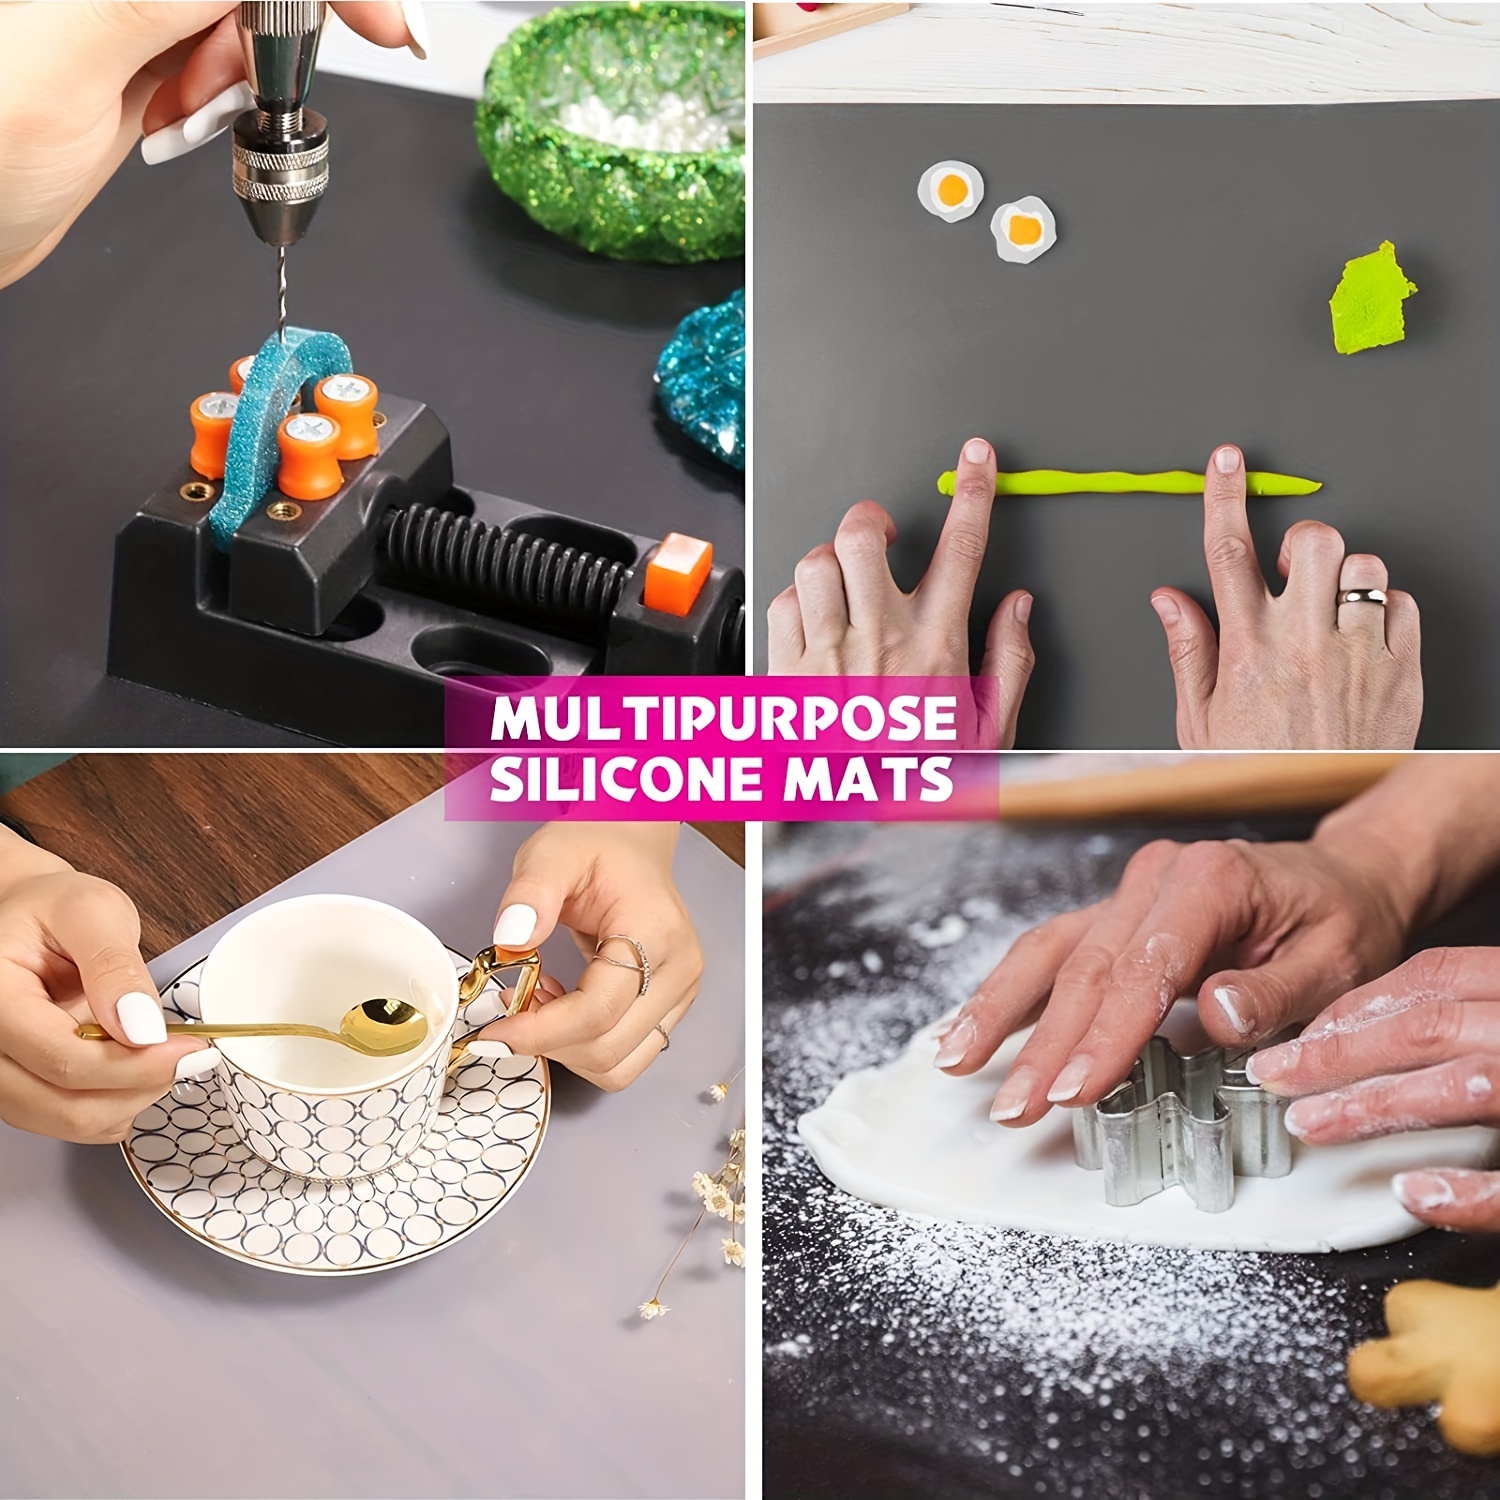  Silicone Mats for Crafts, Translucent, Non-Slip Heat Resistant,  11.8×15.7In (2/Pack) Silicone Placemats for Jewelry, Epoxy Resin,Glitter  Slime, DIY Sheet, Nail Art, Clear Countertop Protector Pad : Arts, Crafts &  Sewing